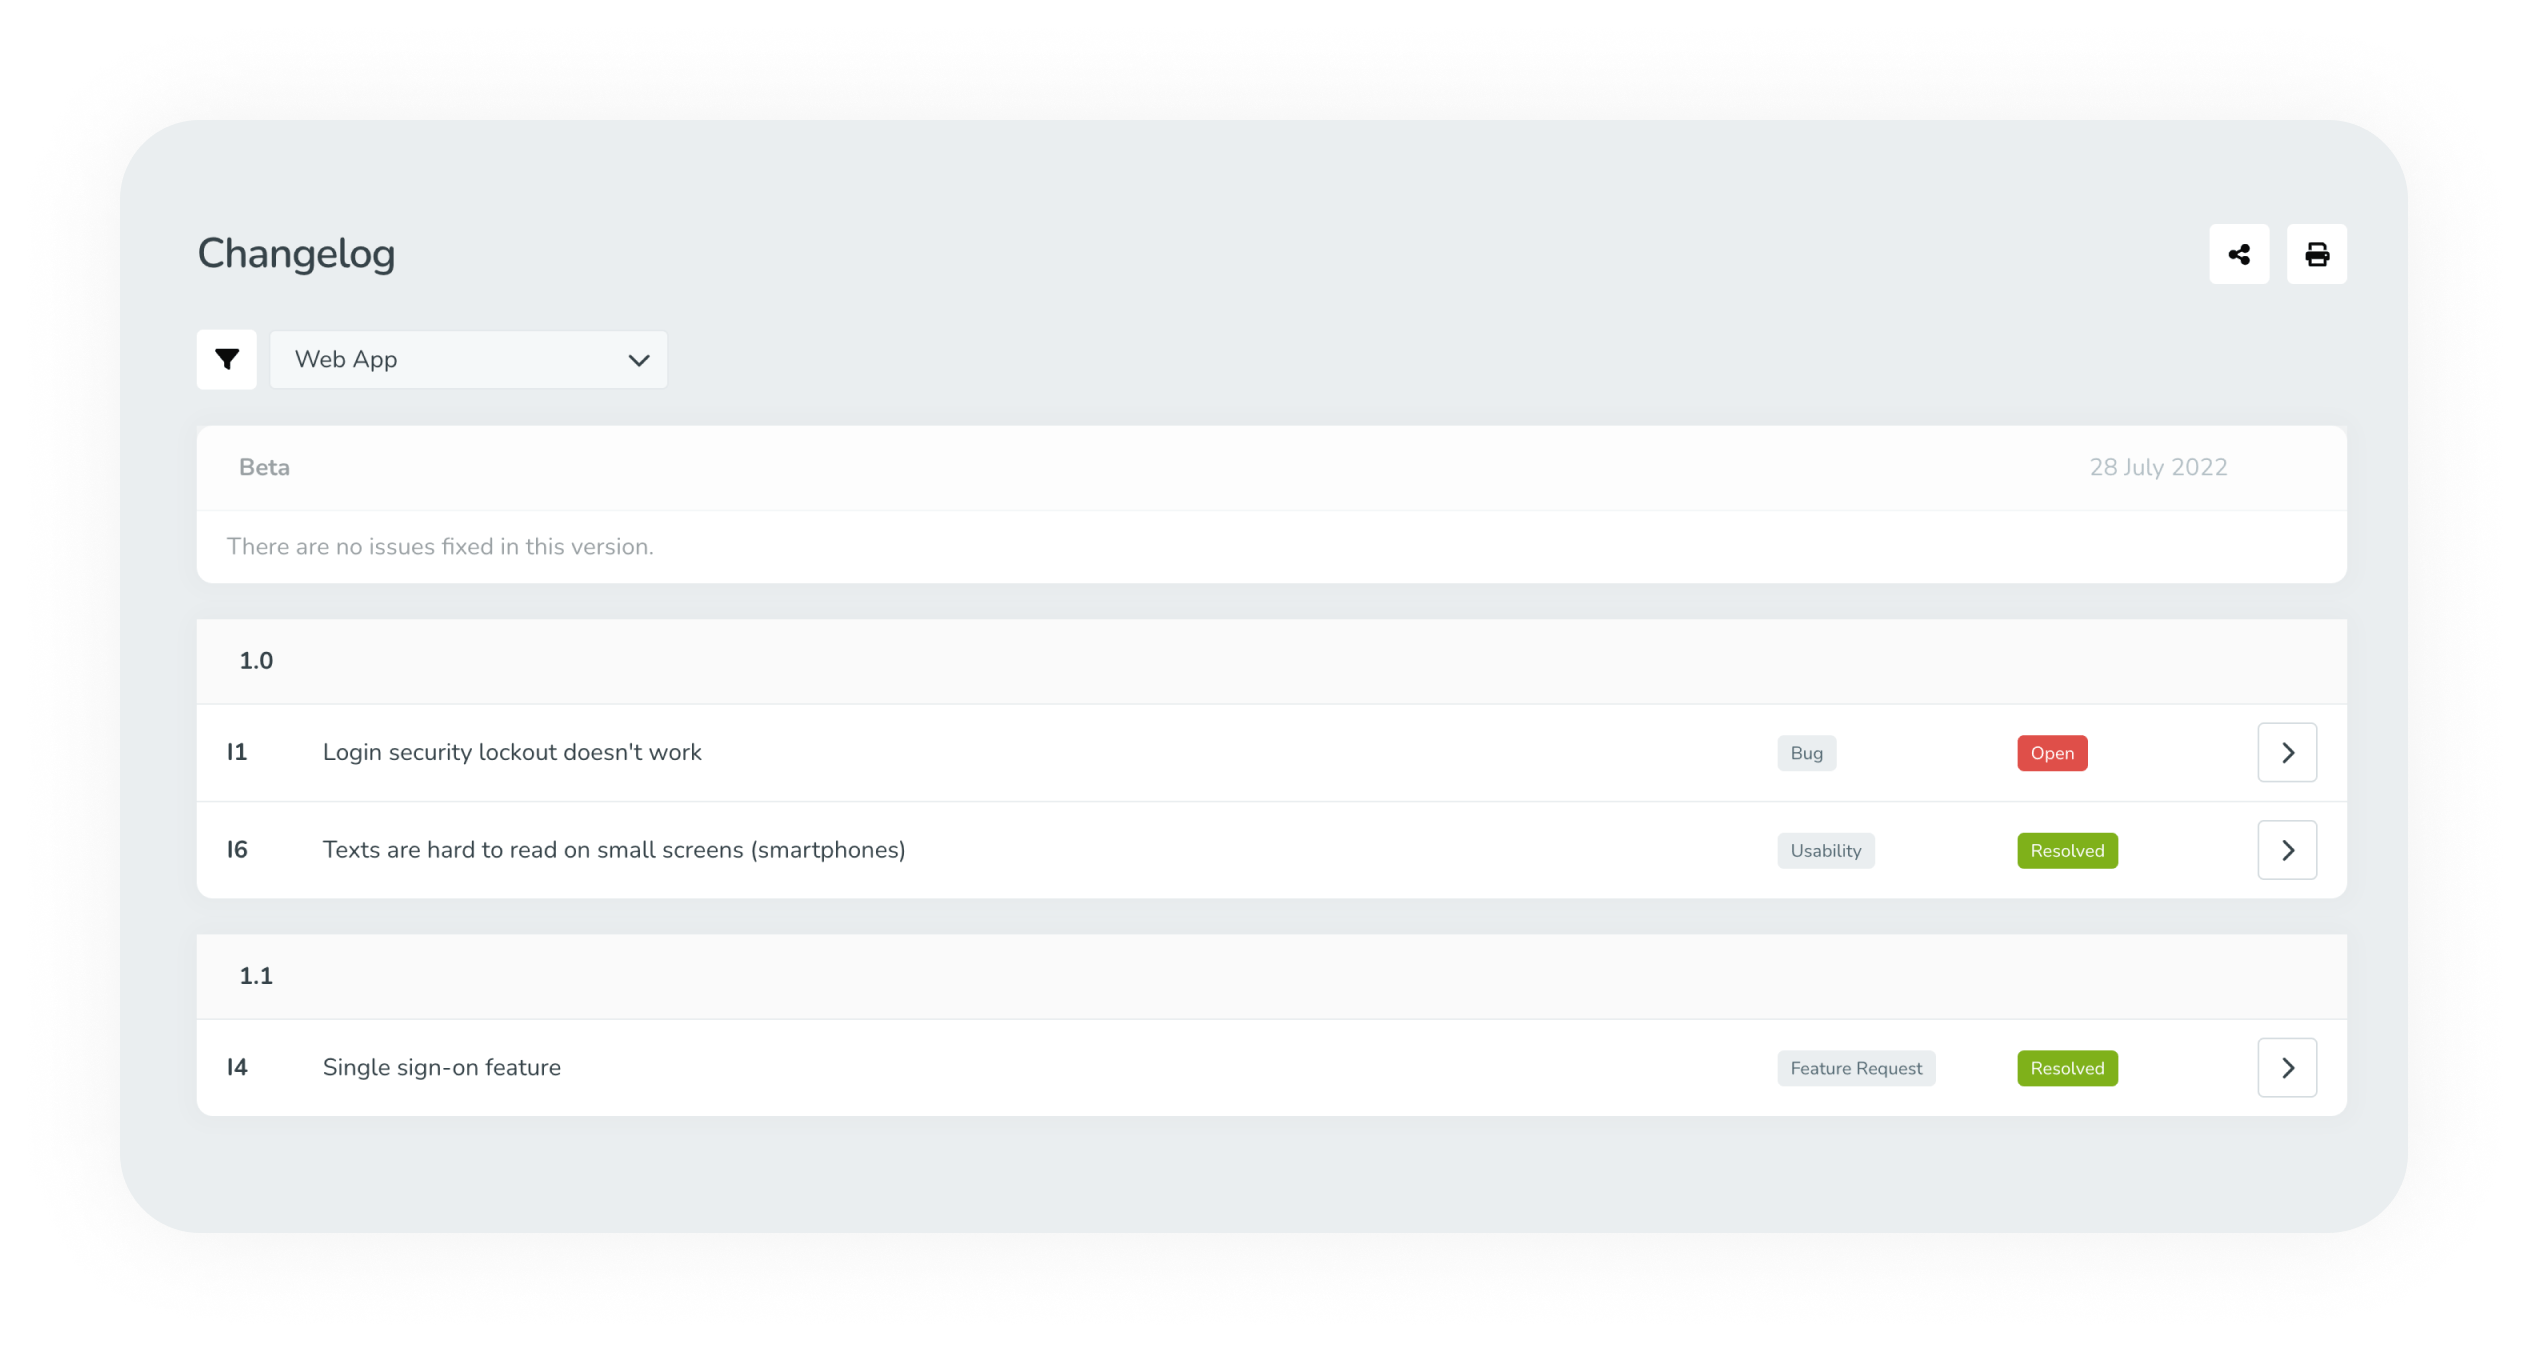 Create a changelog using the built-in issue tracker